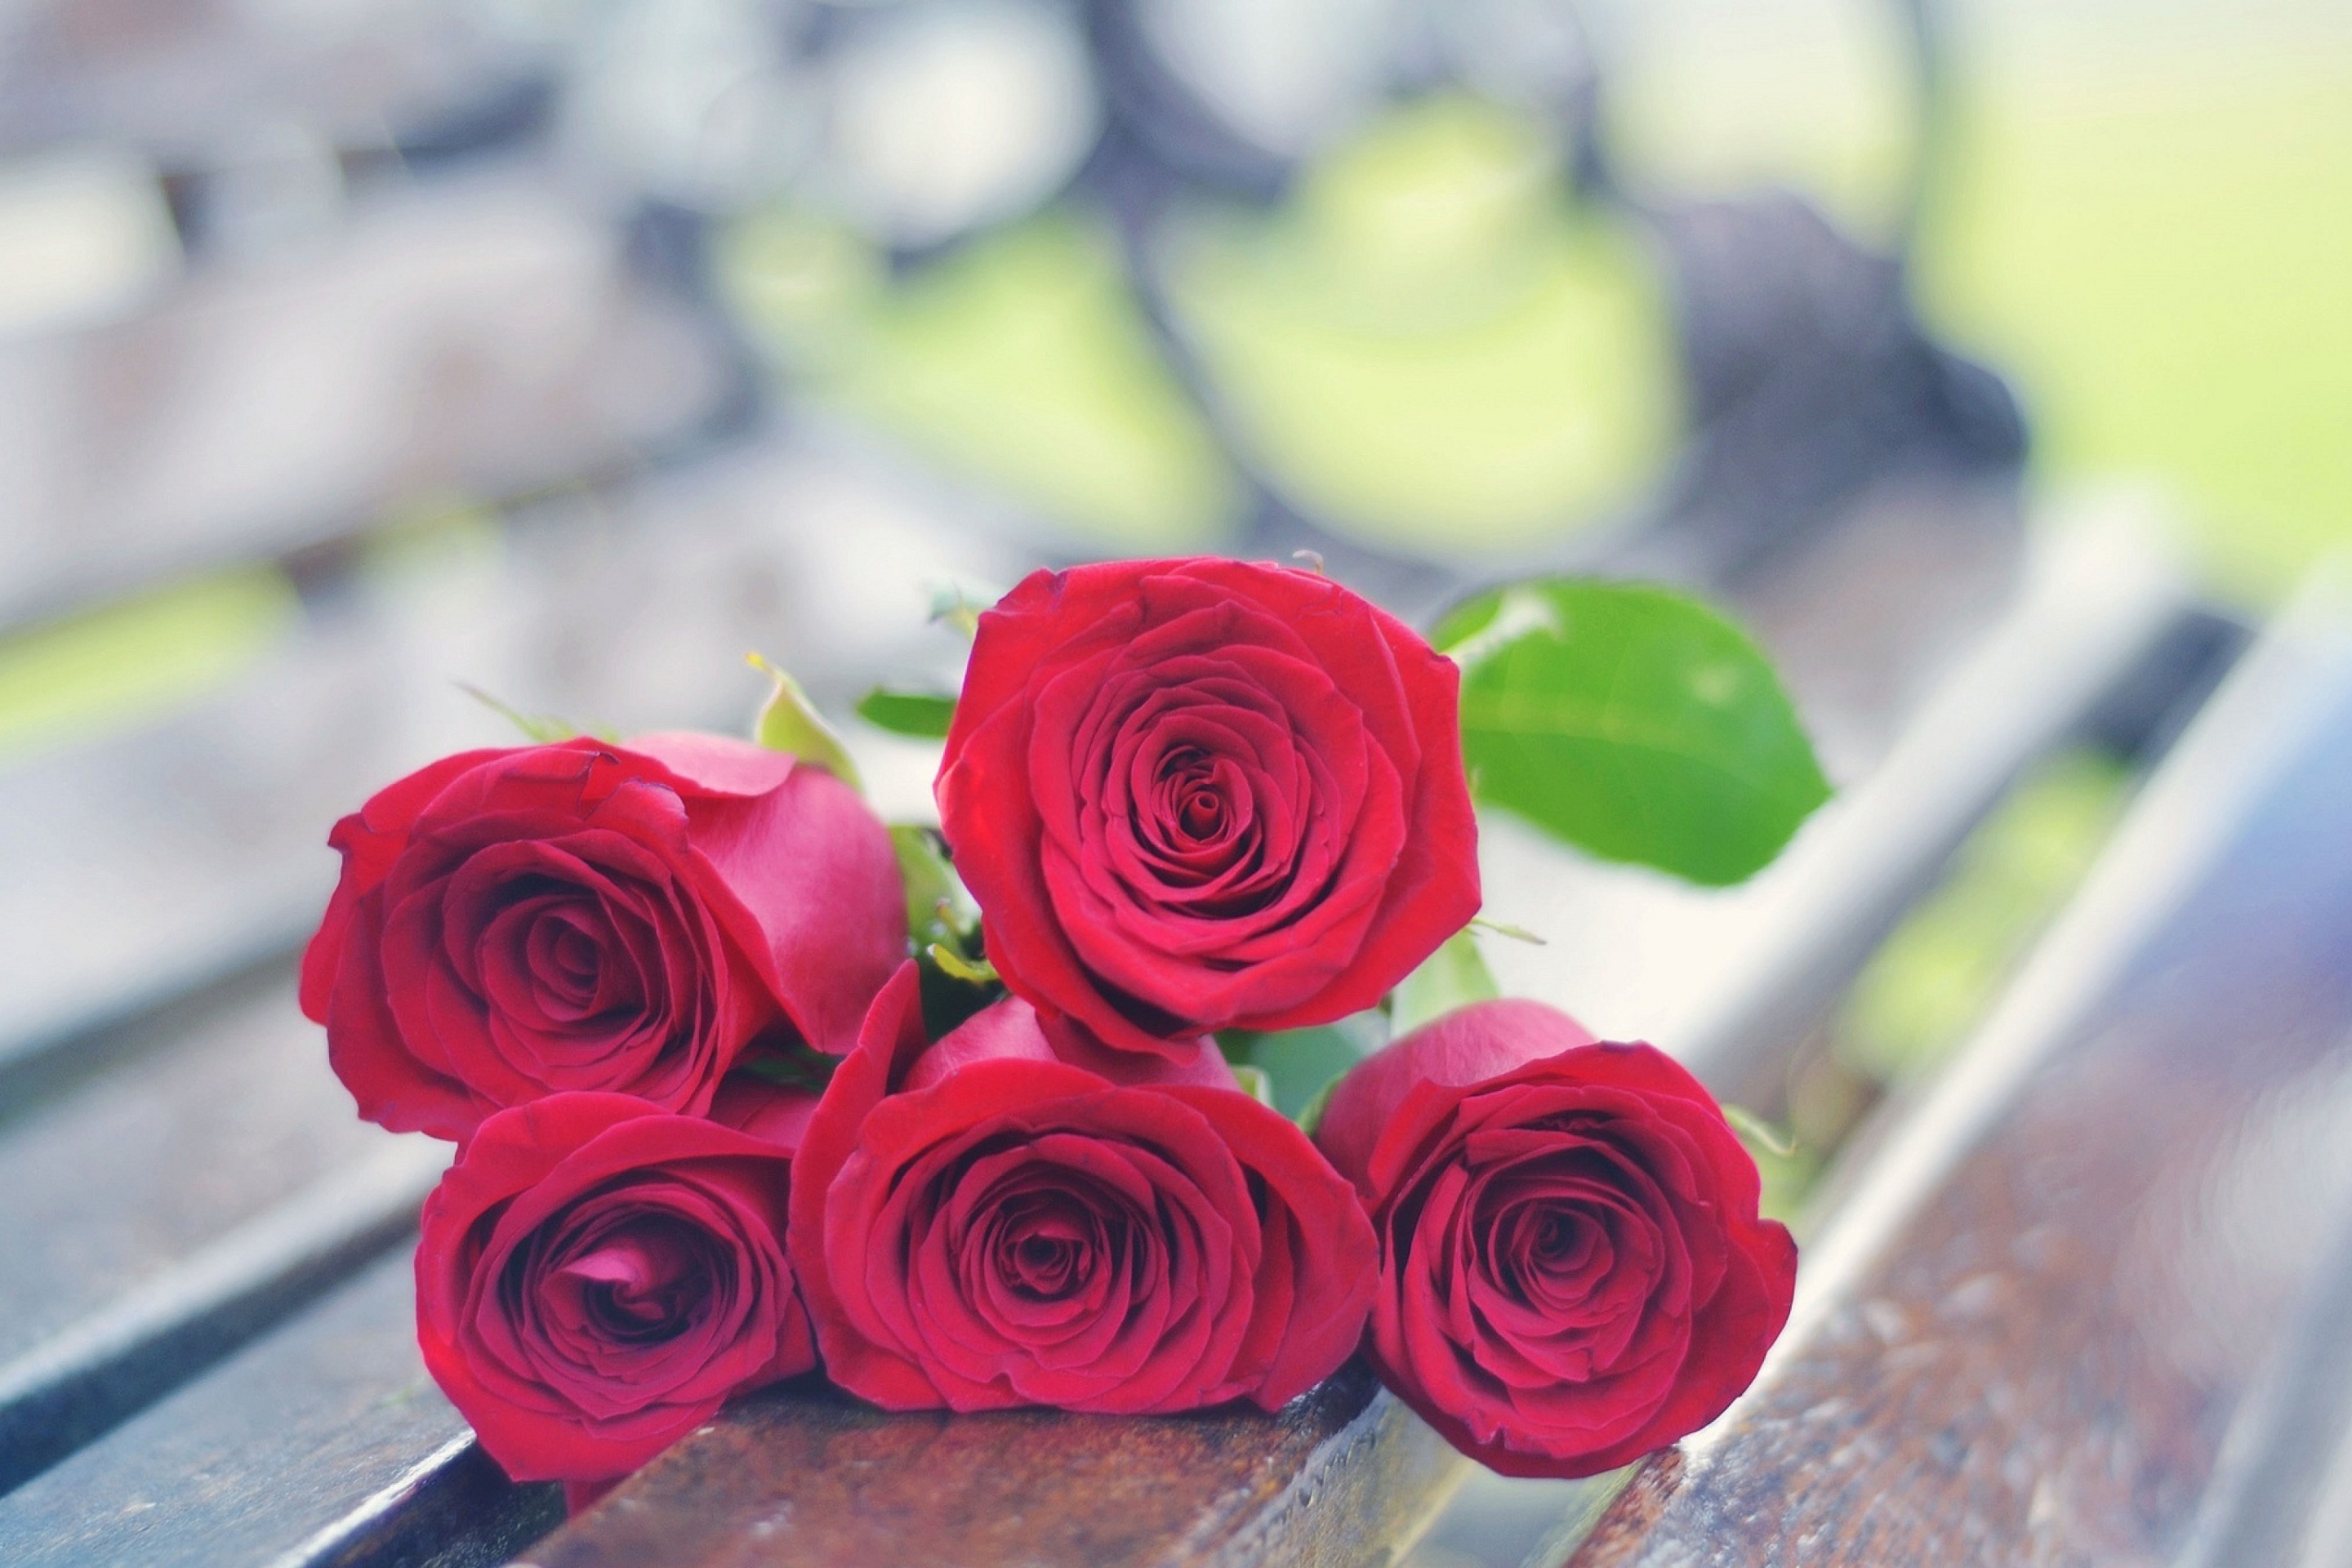 Red Roses Bouquet On Bench wallpaper 2880x1920